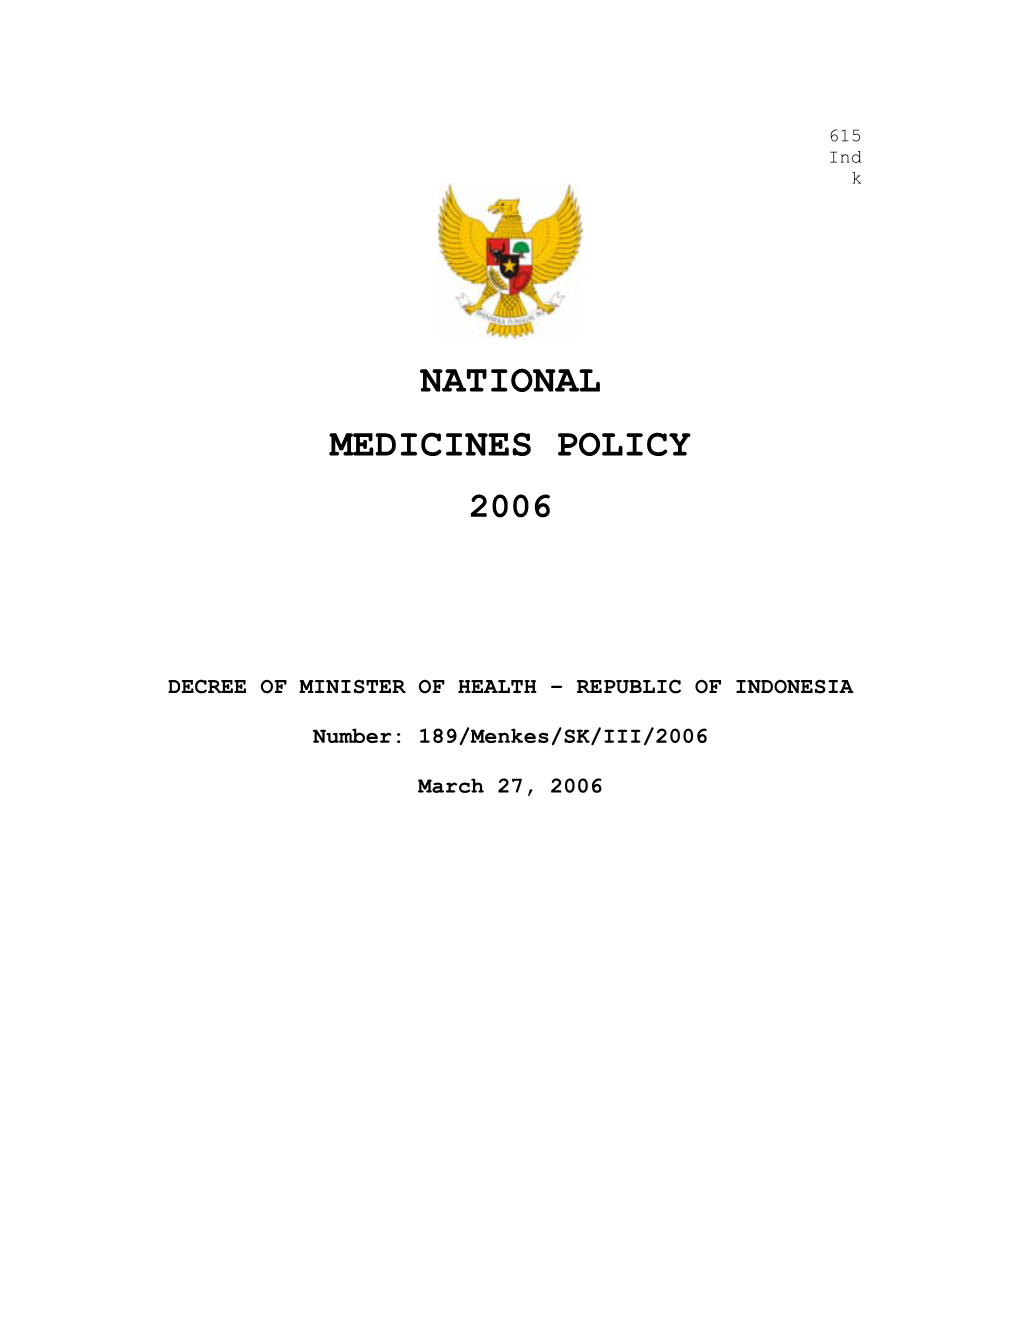 National Medicines Policy 2006